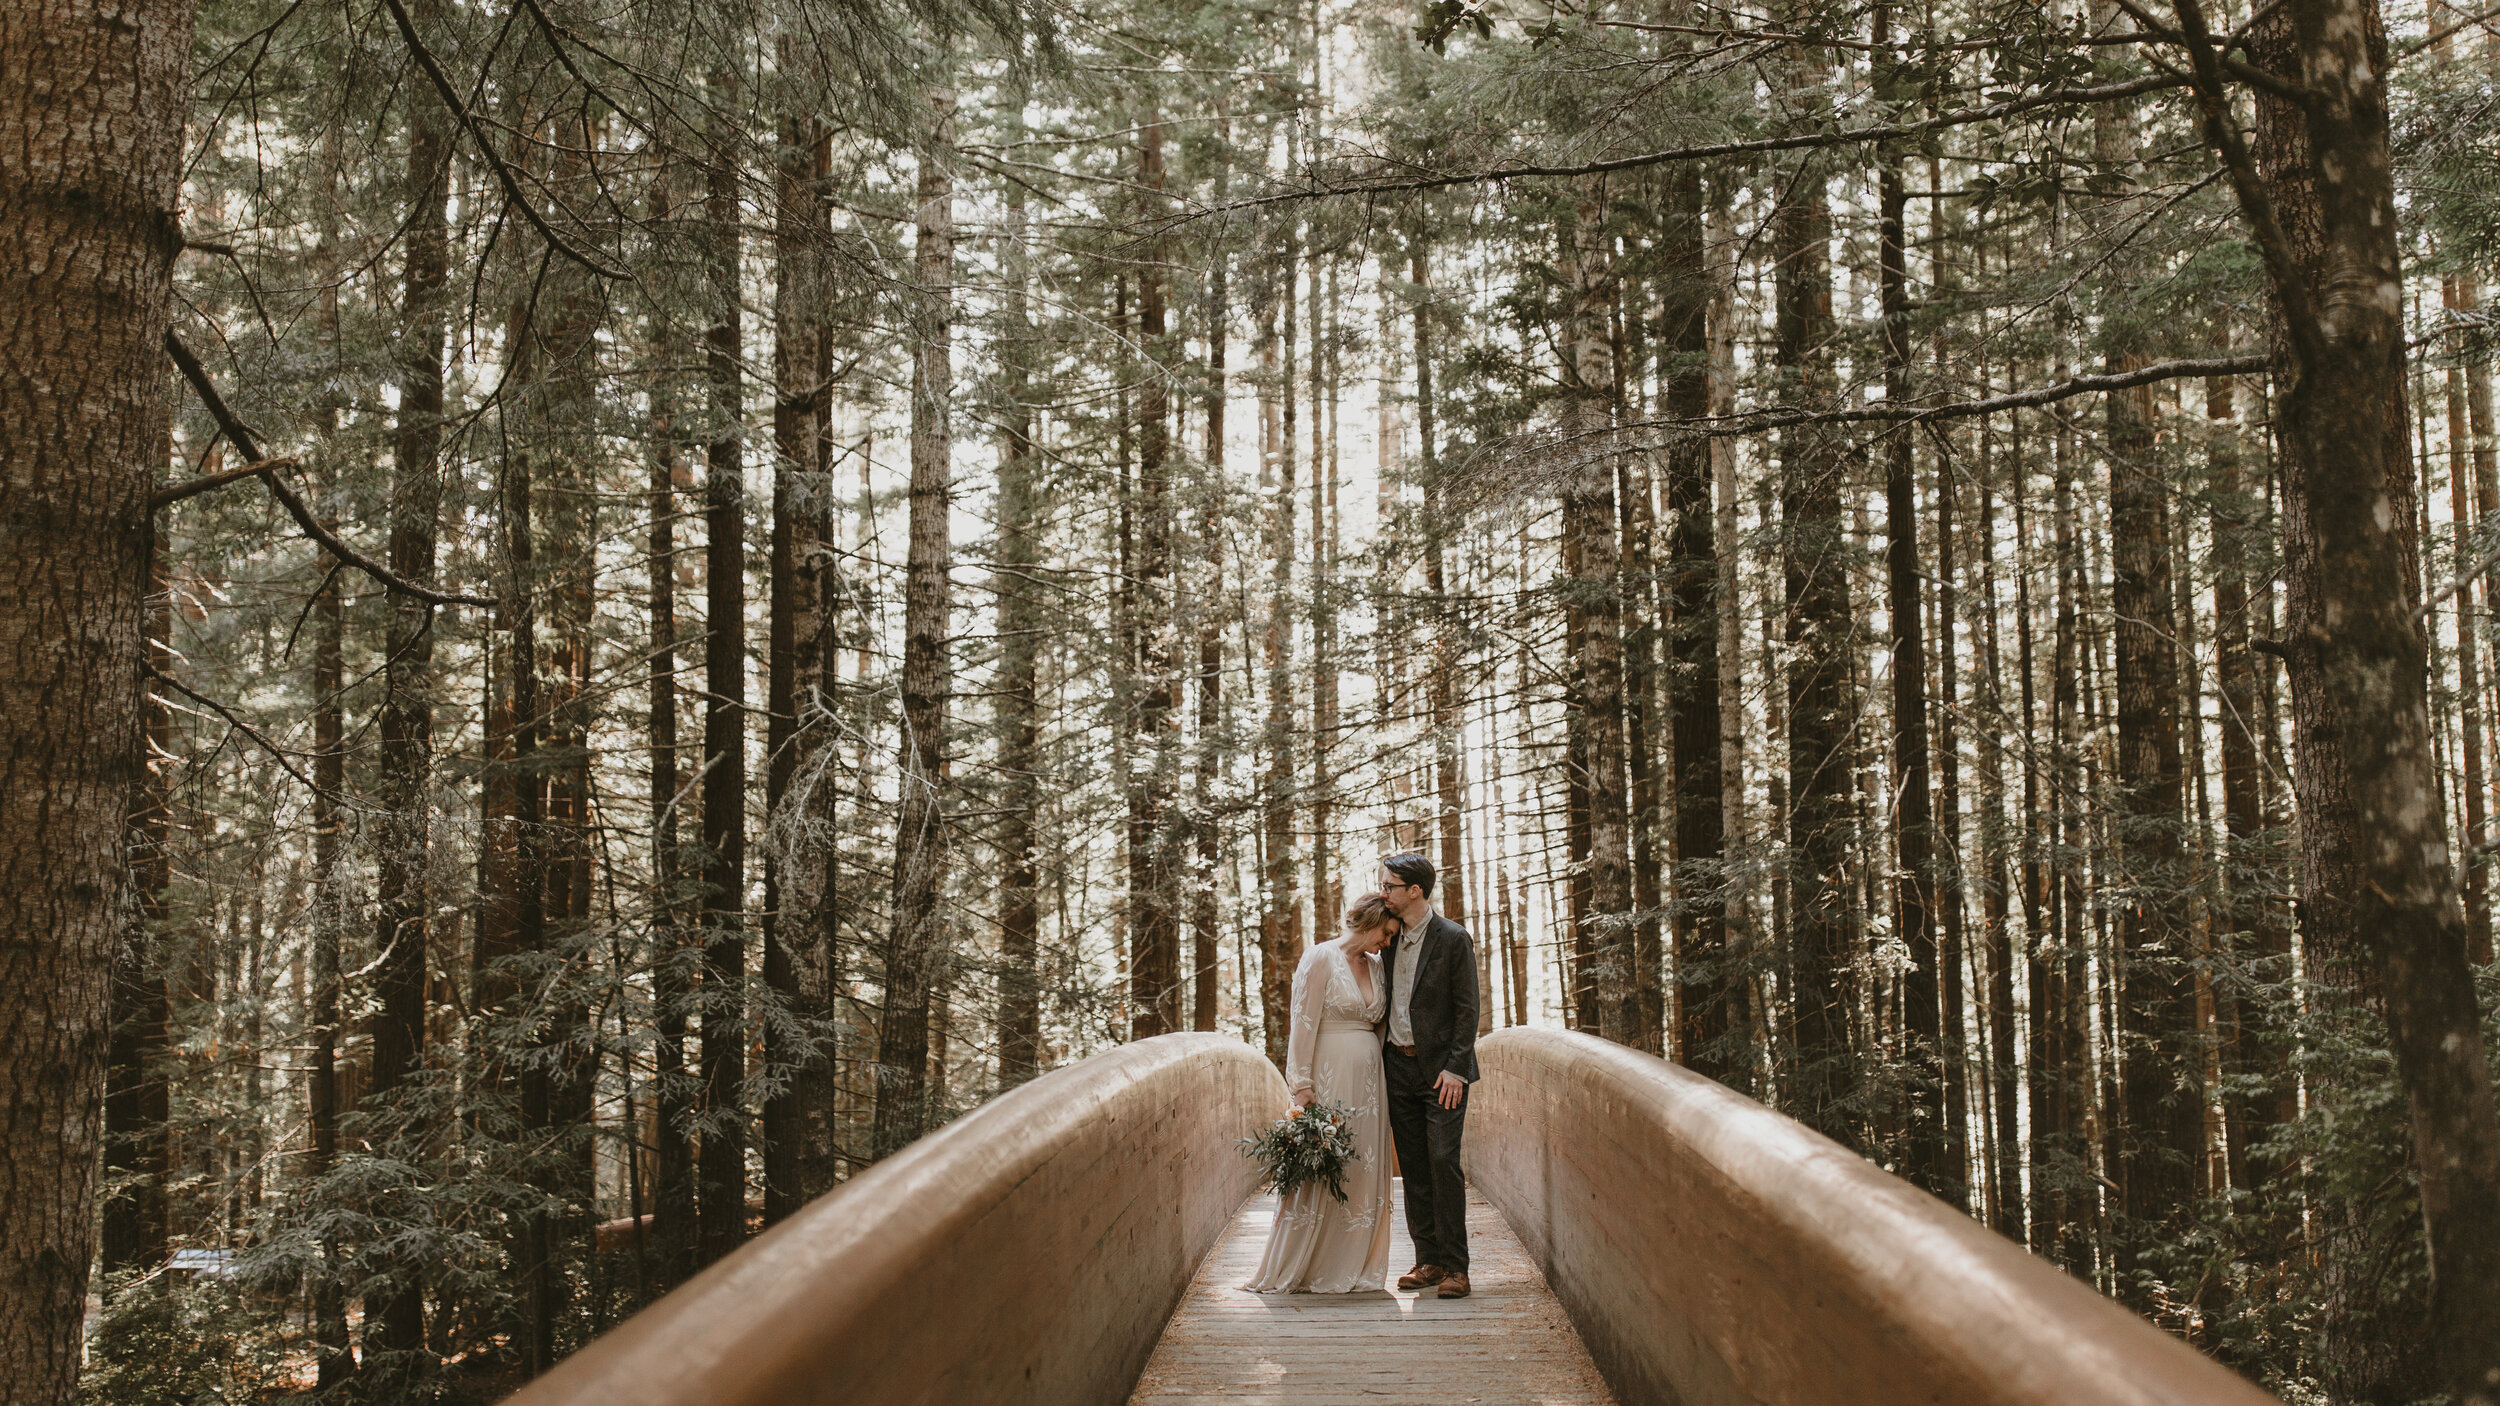 nicole-daacke-photography-redwood-forest-elopement-in-northern-california-patricks-point-coast-adventure-elopement-photography-redwoods-elopement-photographer-167.jpg